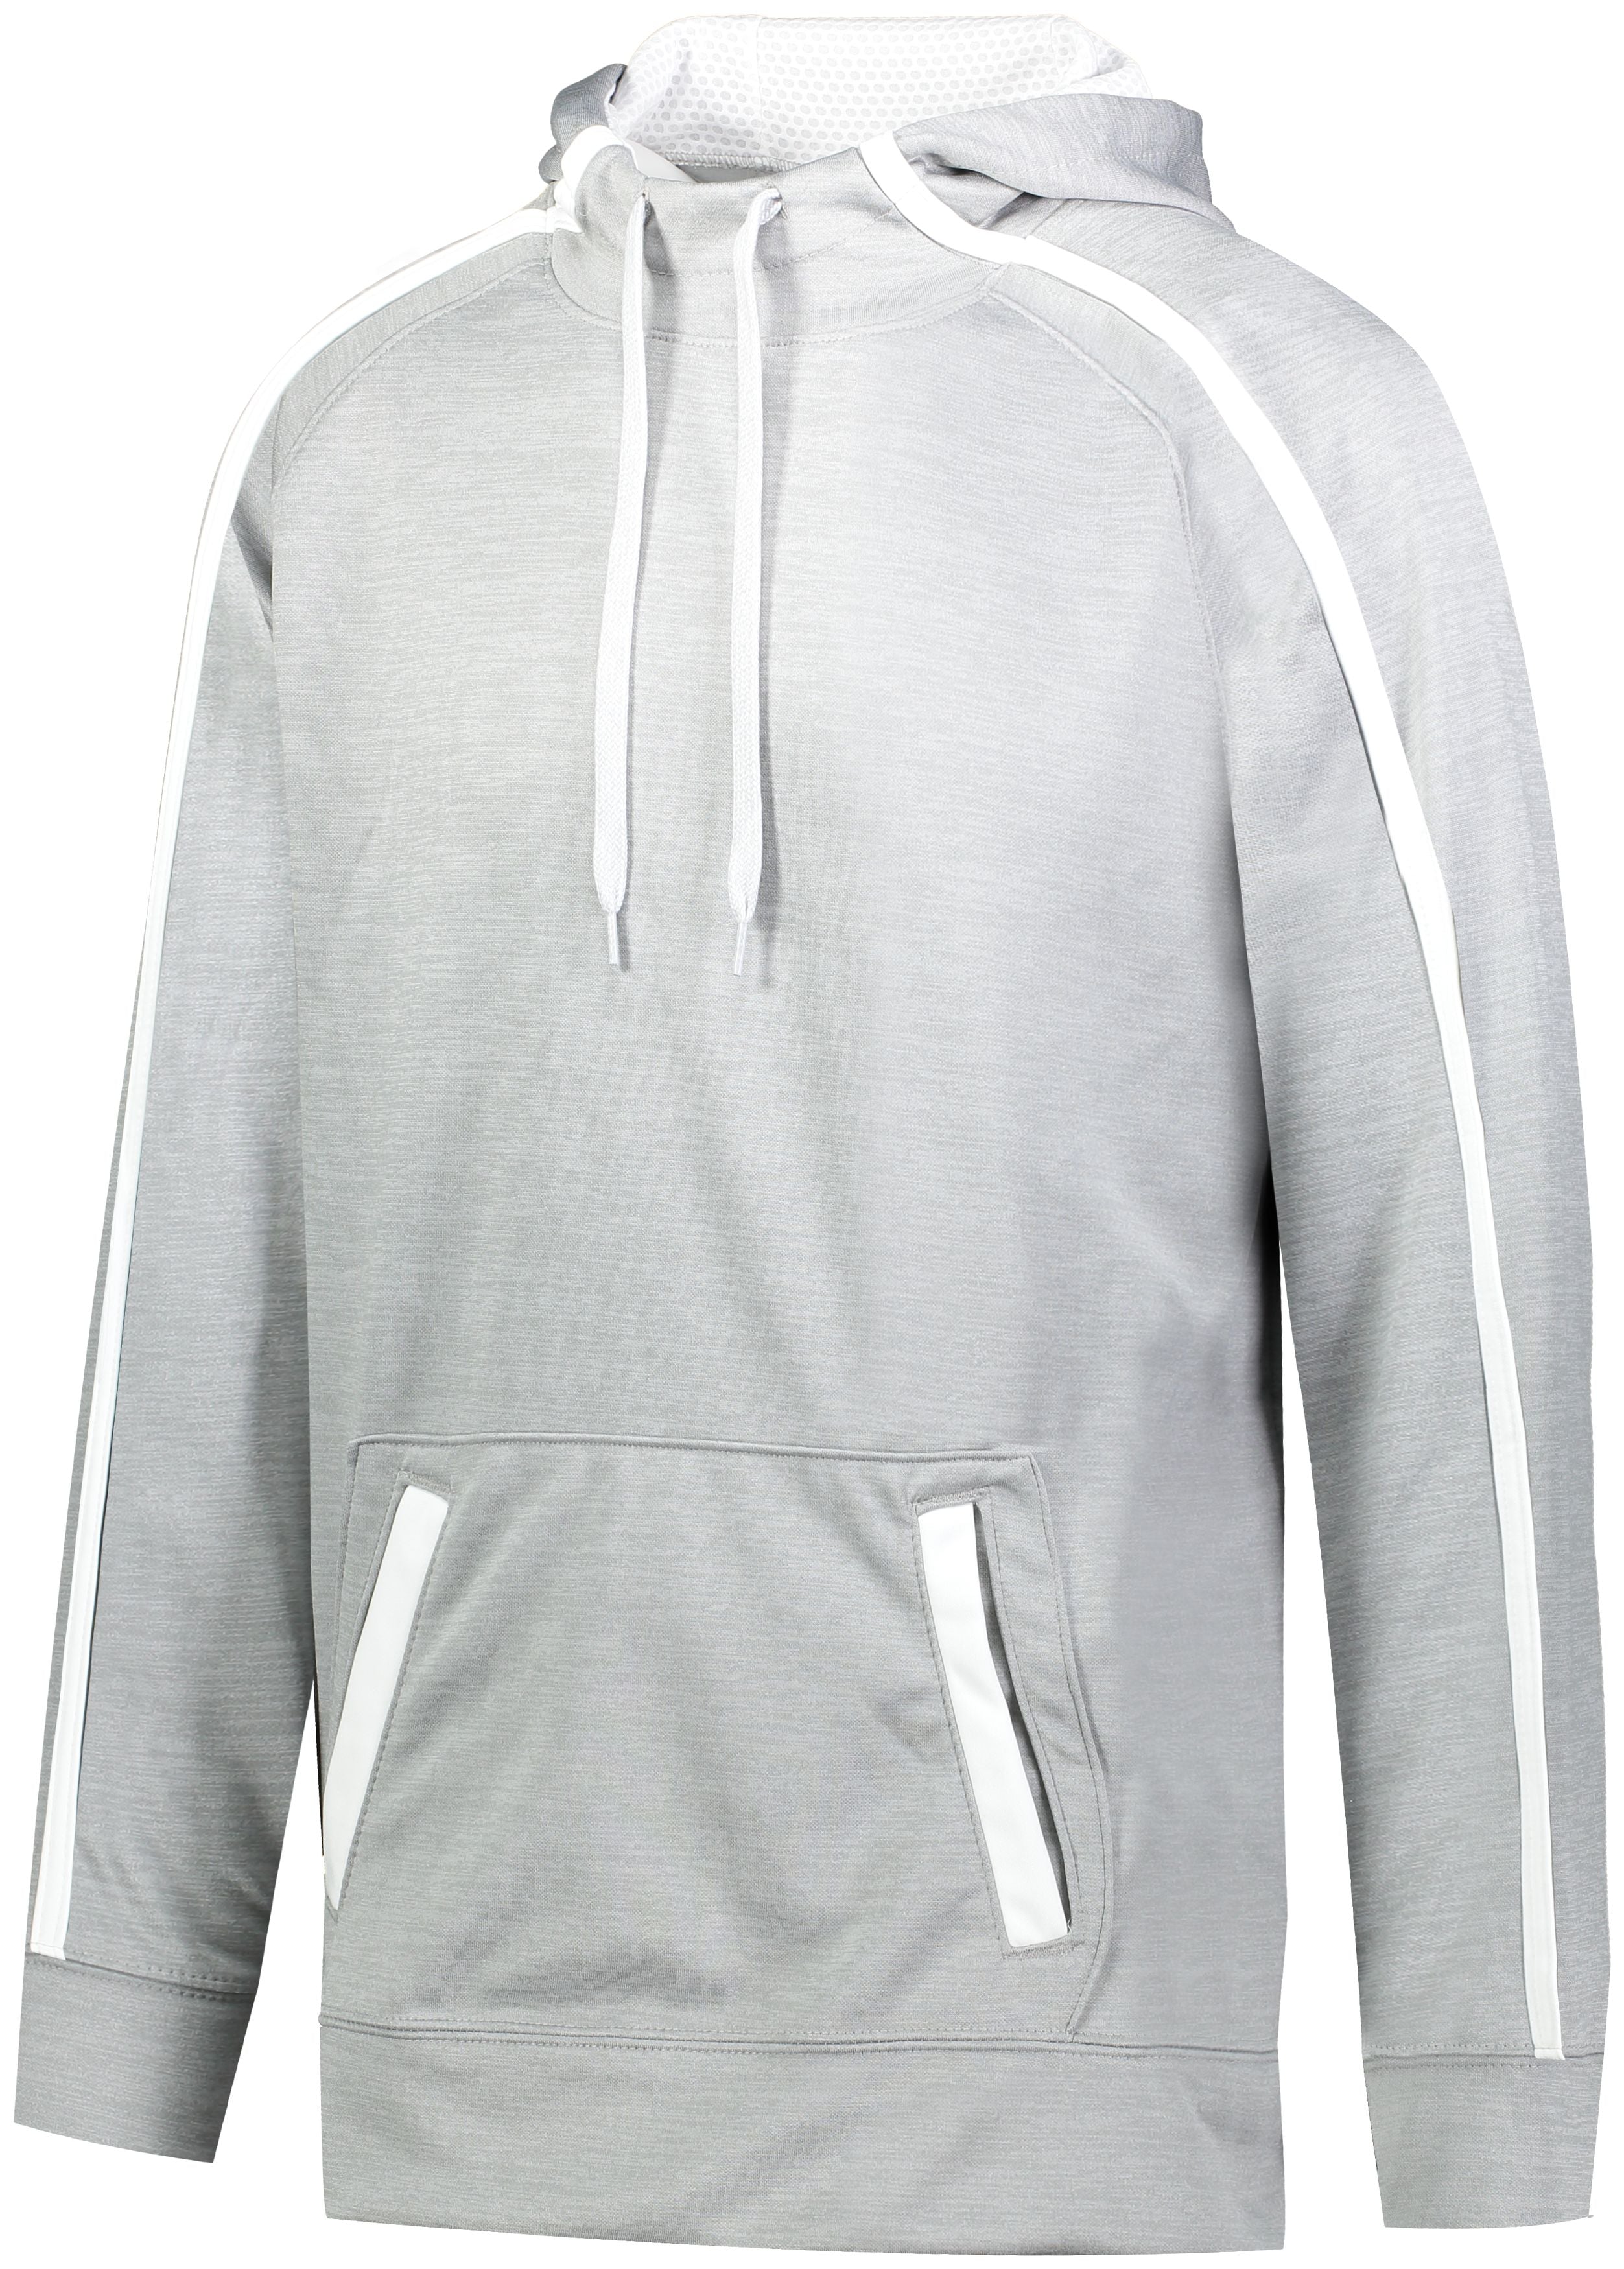 Augusta Sportswear Stoked Tonal Heather Hoodie in Silver/White  -Part of the Adult, Augusta-Products, Shirts, Tonal-Fleece-Collection product lines at KanaleyCreations.com